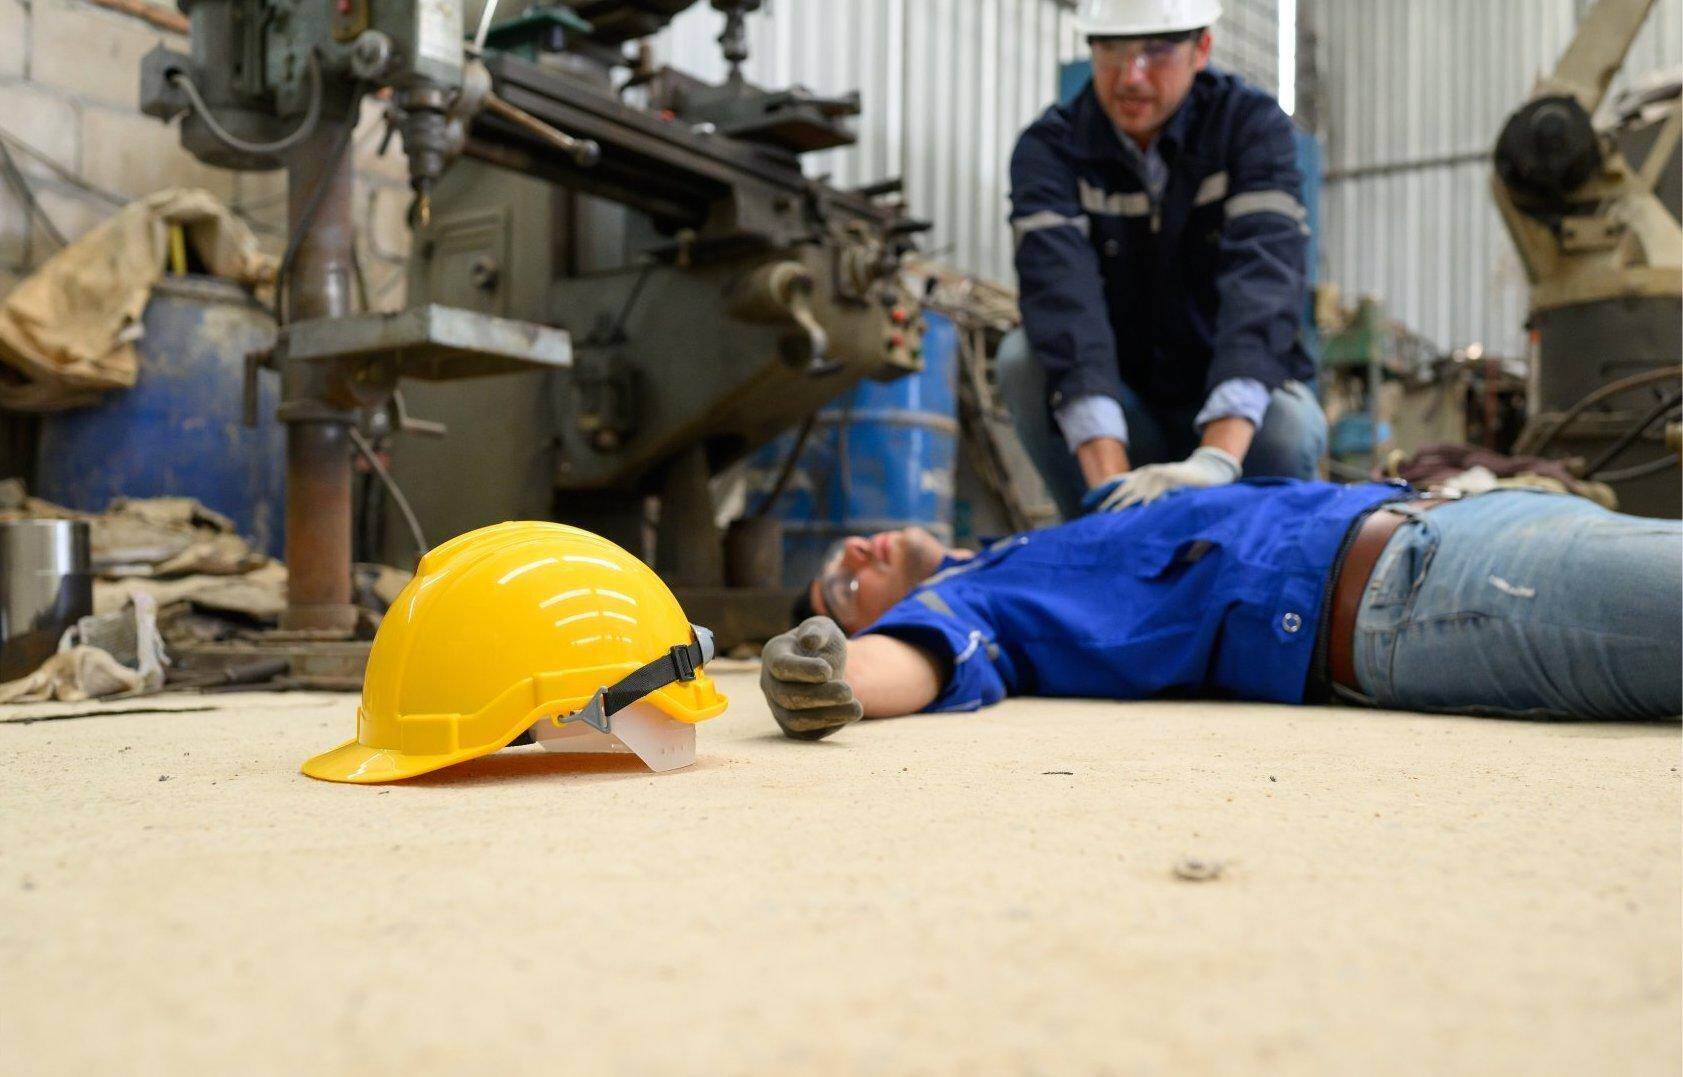 An unconscious man who has been injured on the job who will file for workers compensation in Mableton, Georgia